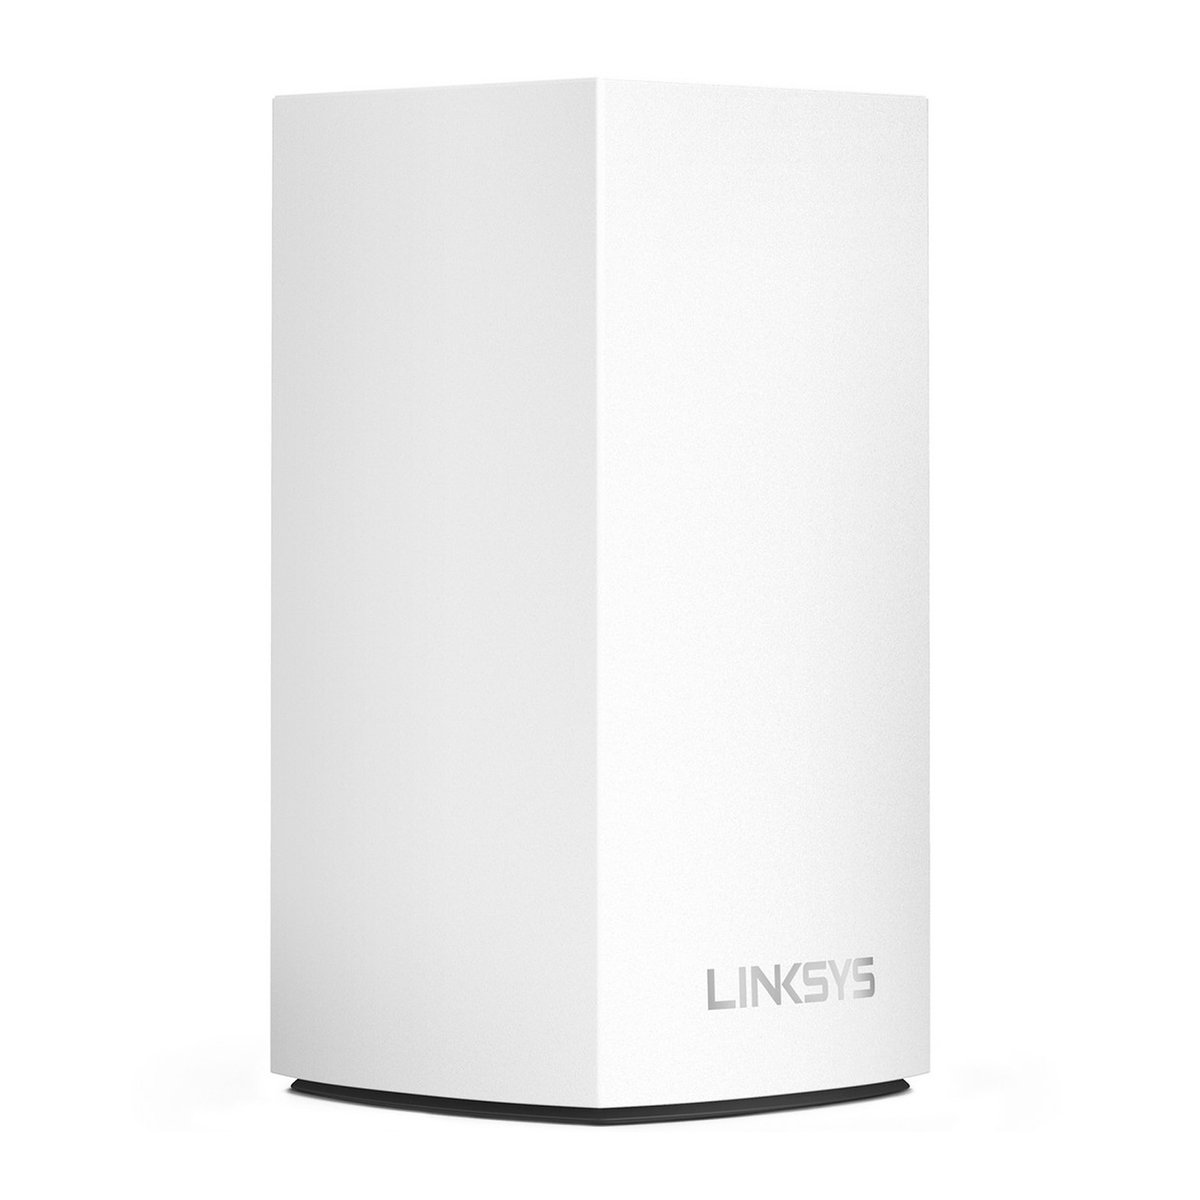 Linksys Velop Whole Home Intelligent Mesh Dual Band WiFi System, Tri-Band, 2-pack